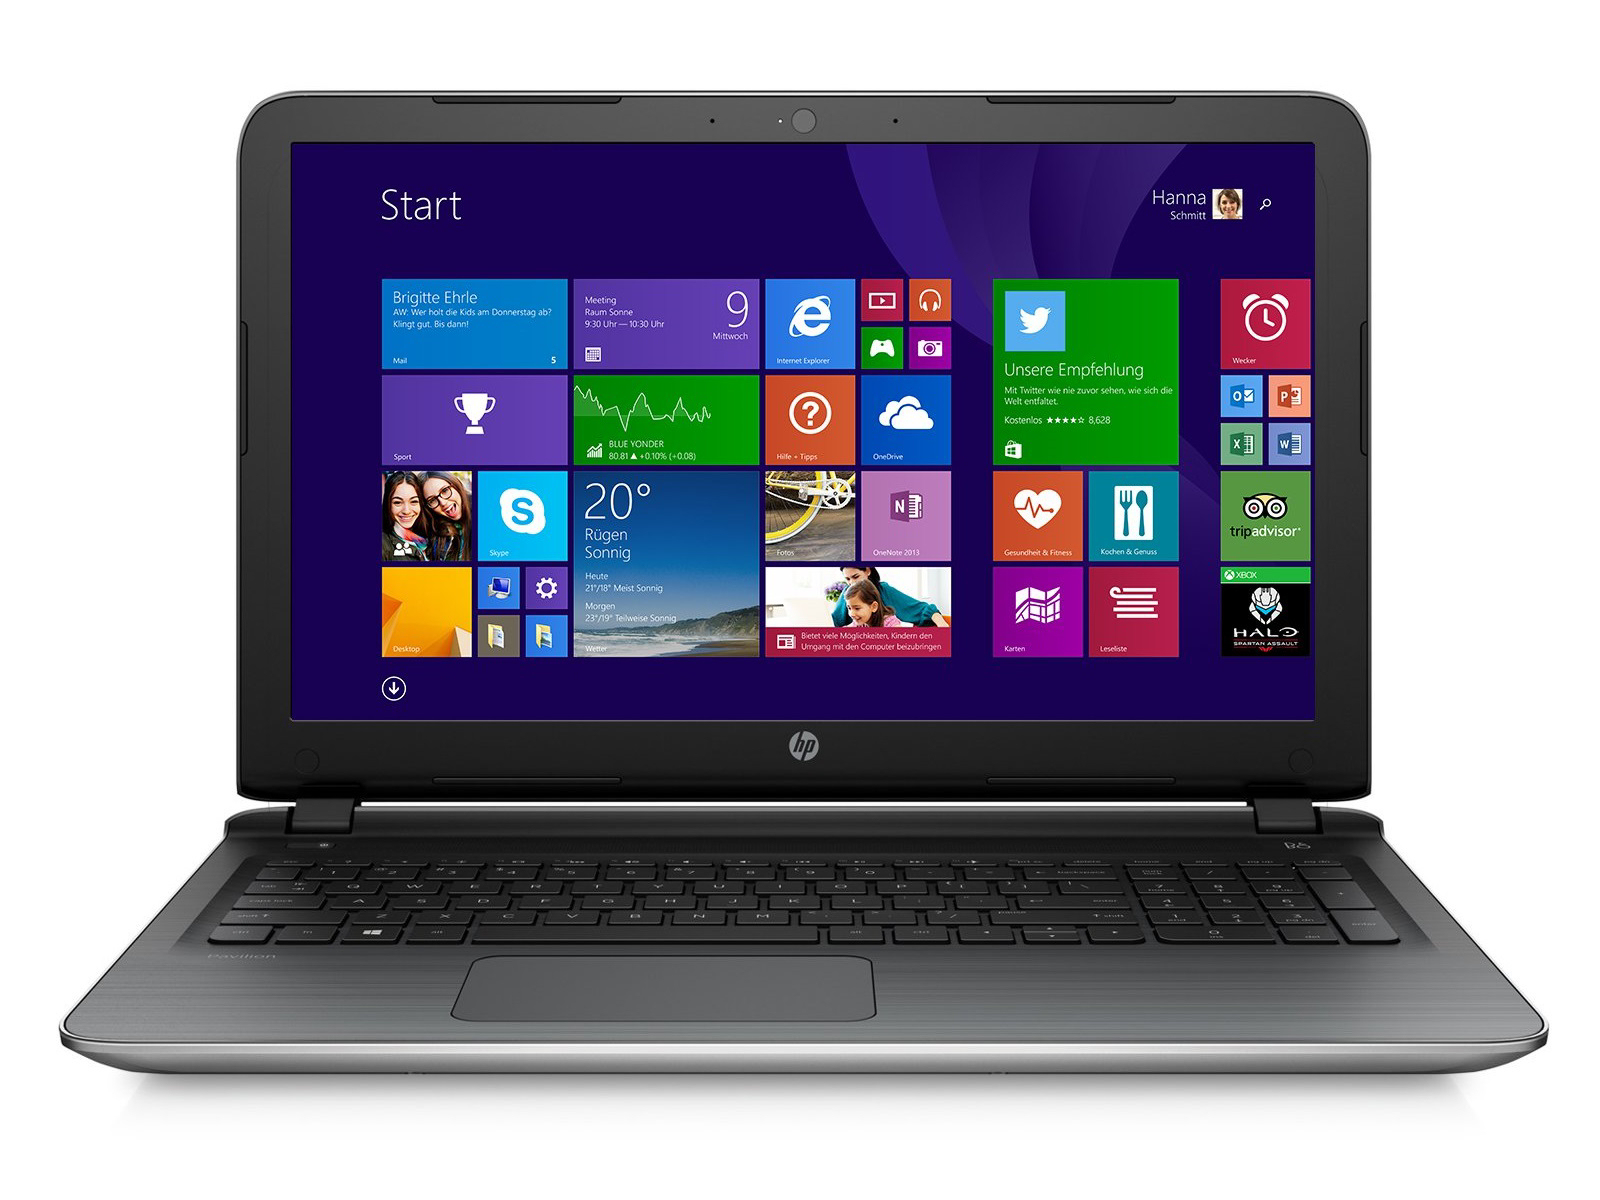 HP Pavilion 15 Notebook Review NotebookCheck Reviews